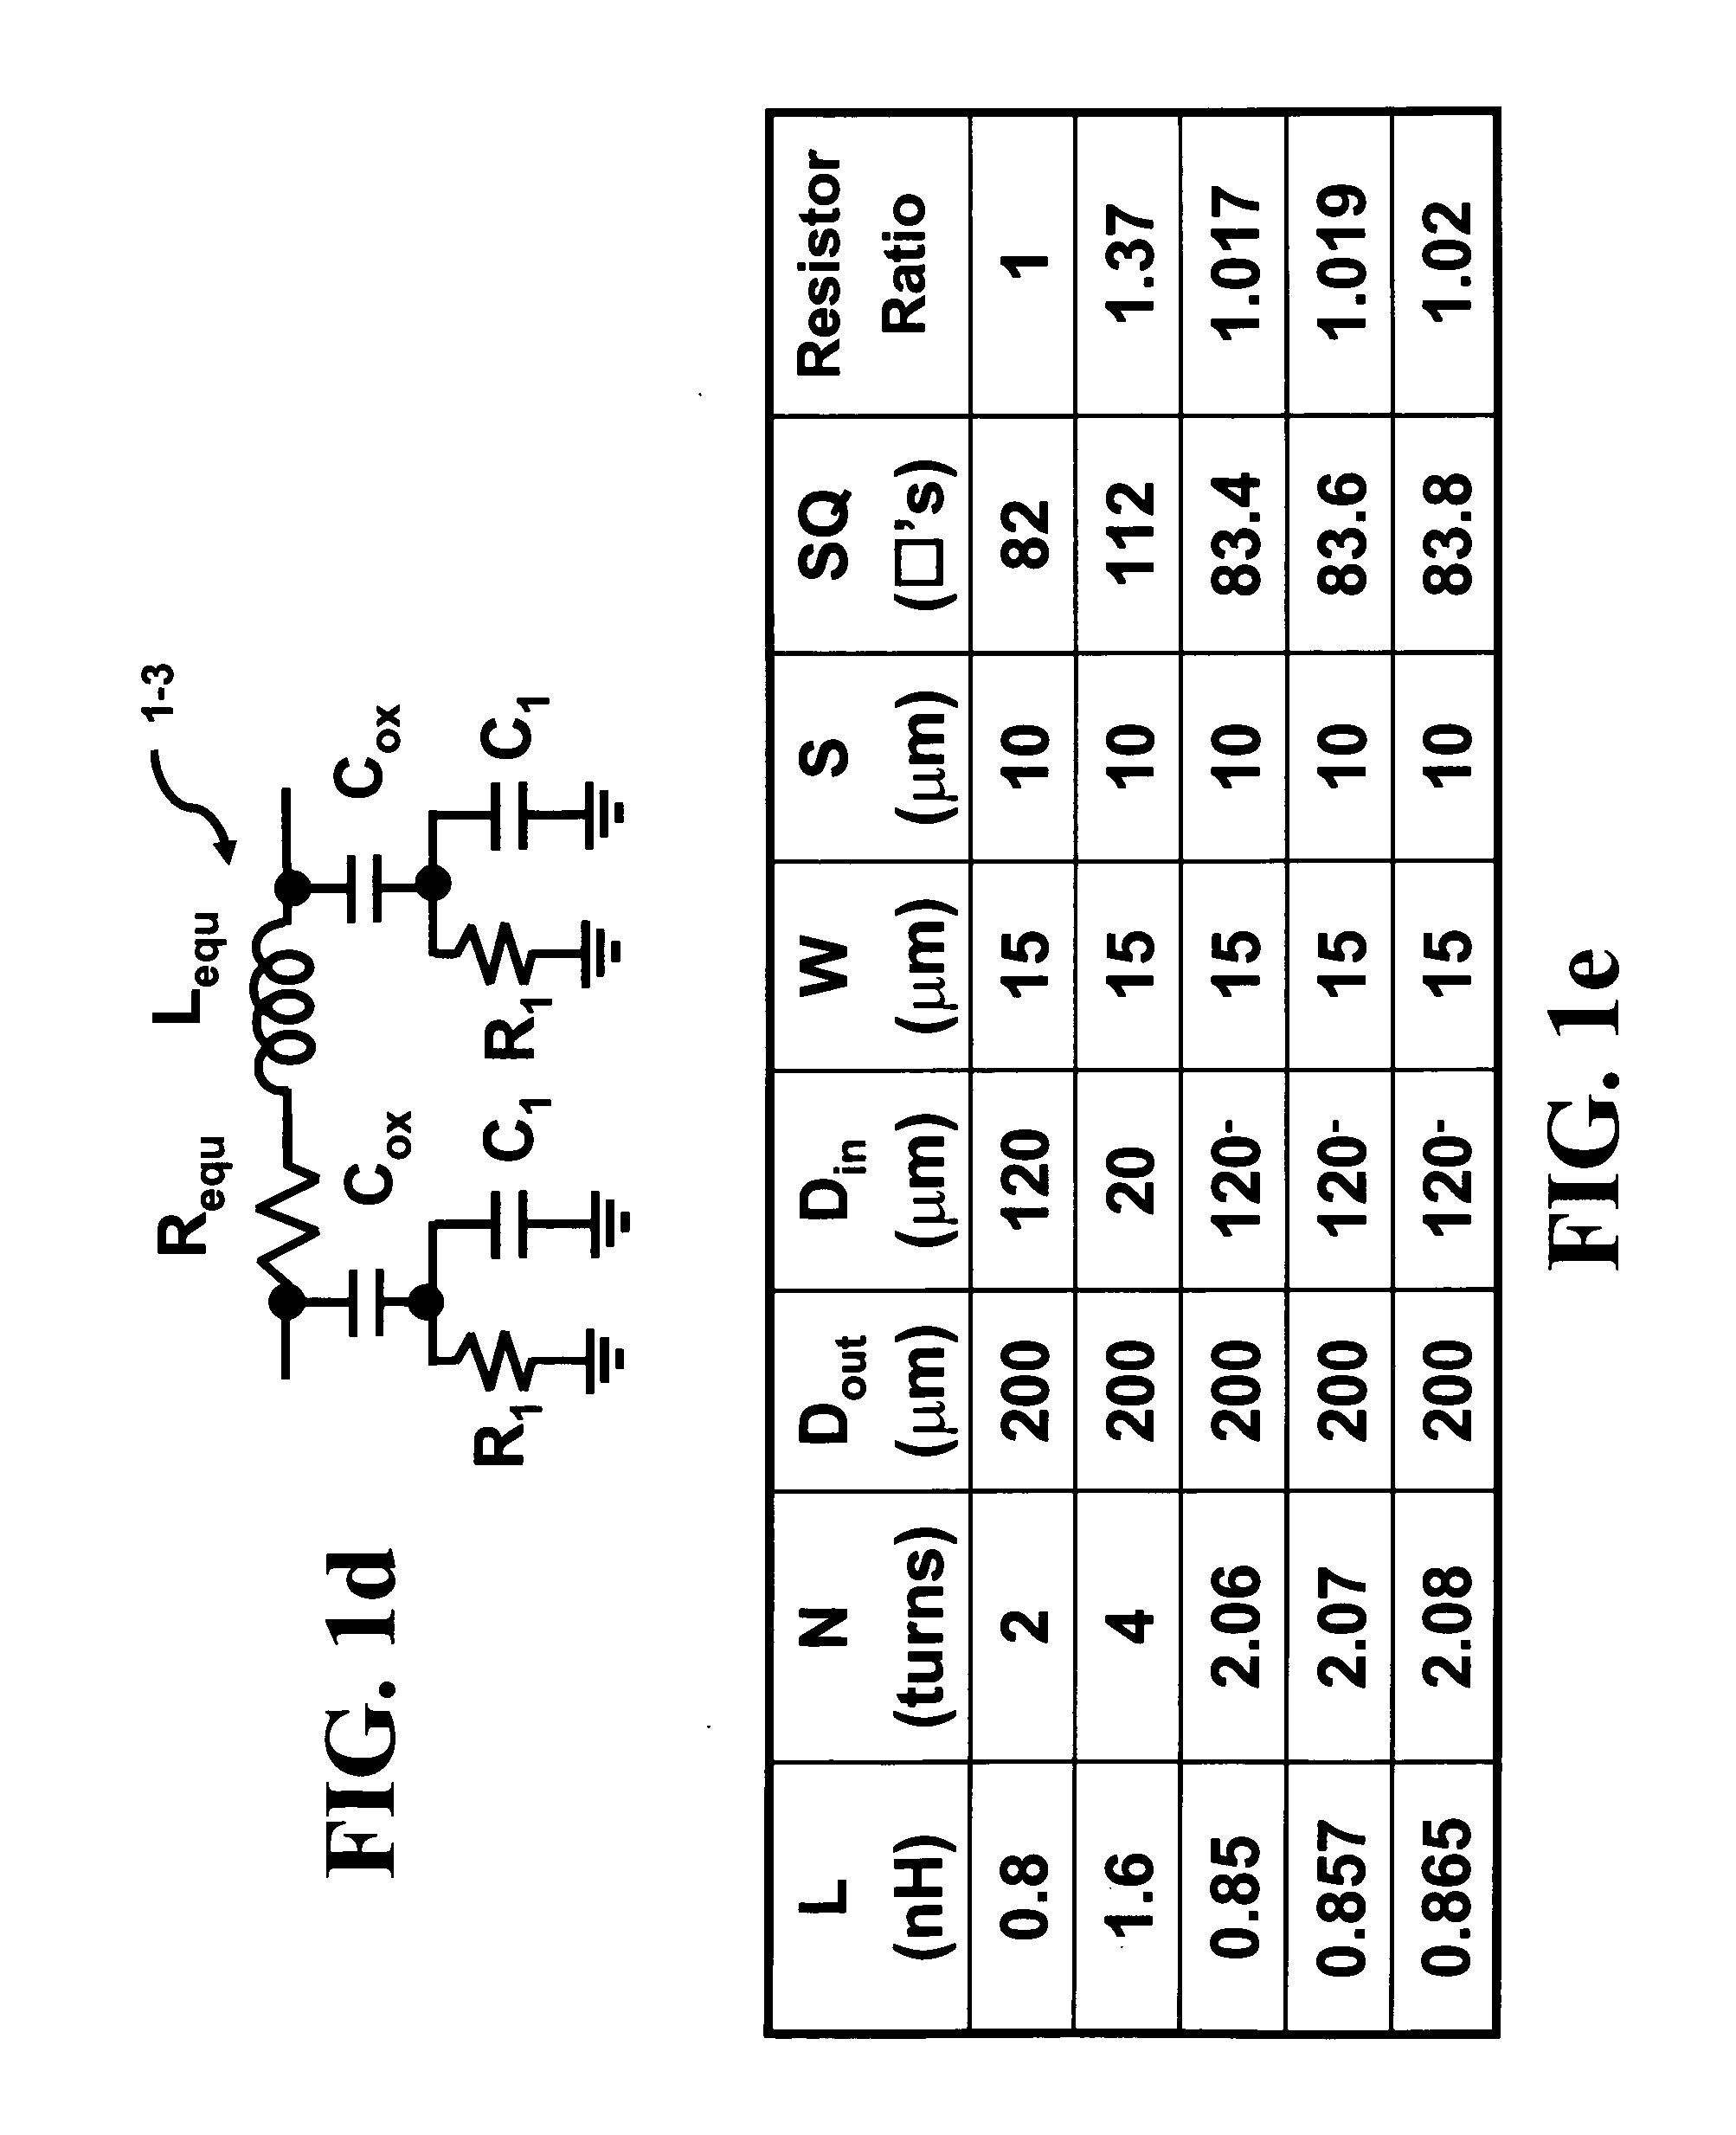 Fabrication of inductors in transformer based tank circuitry